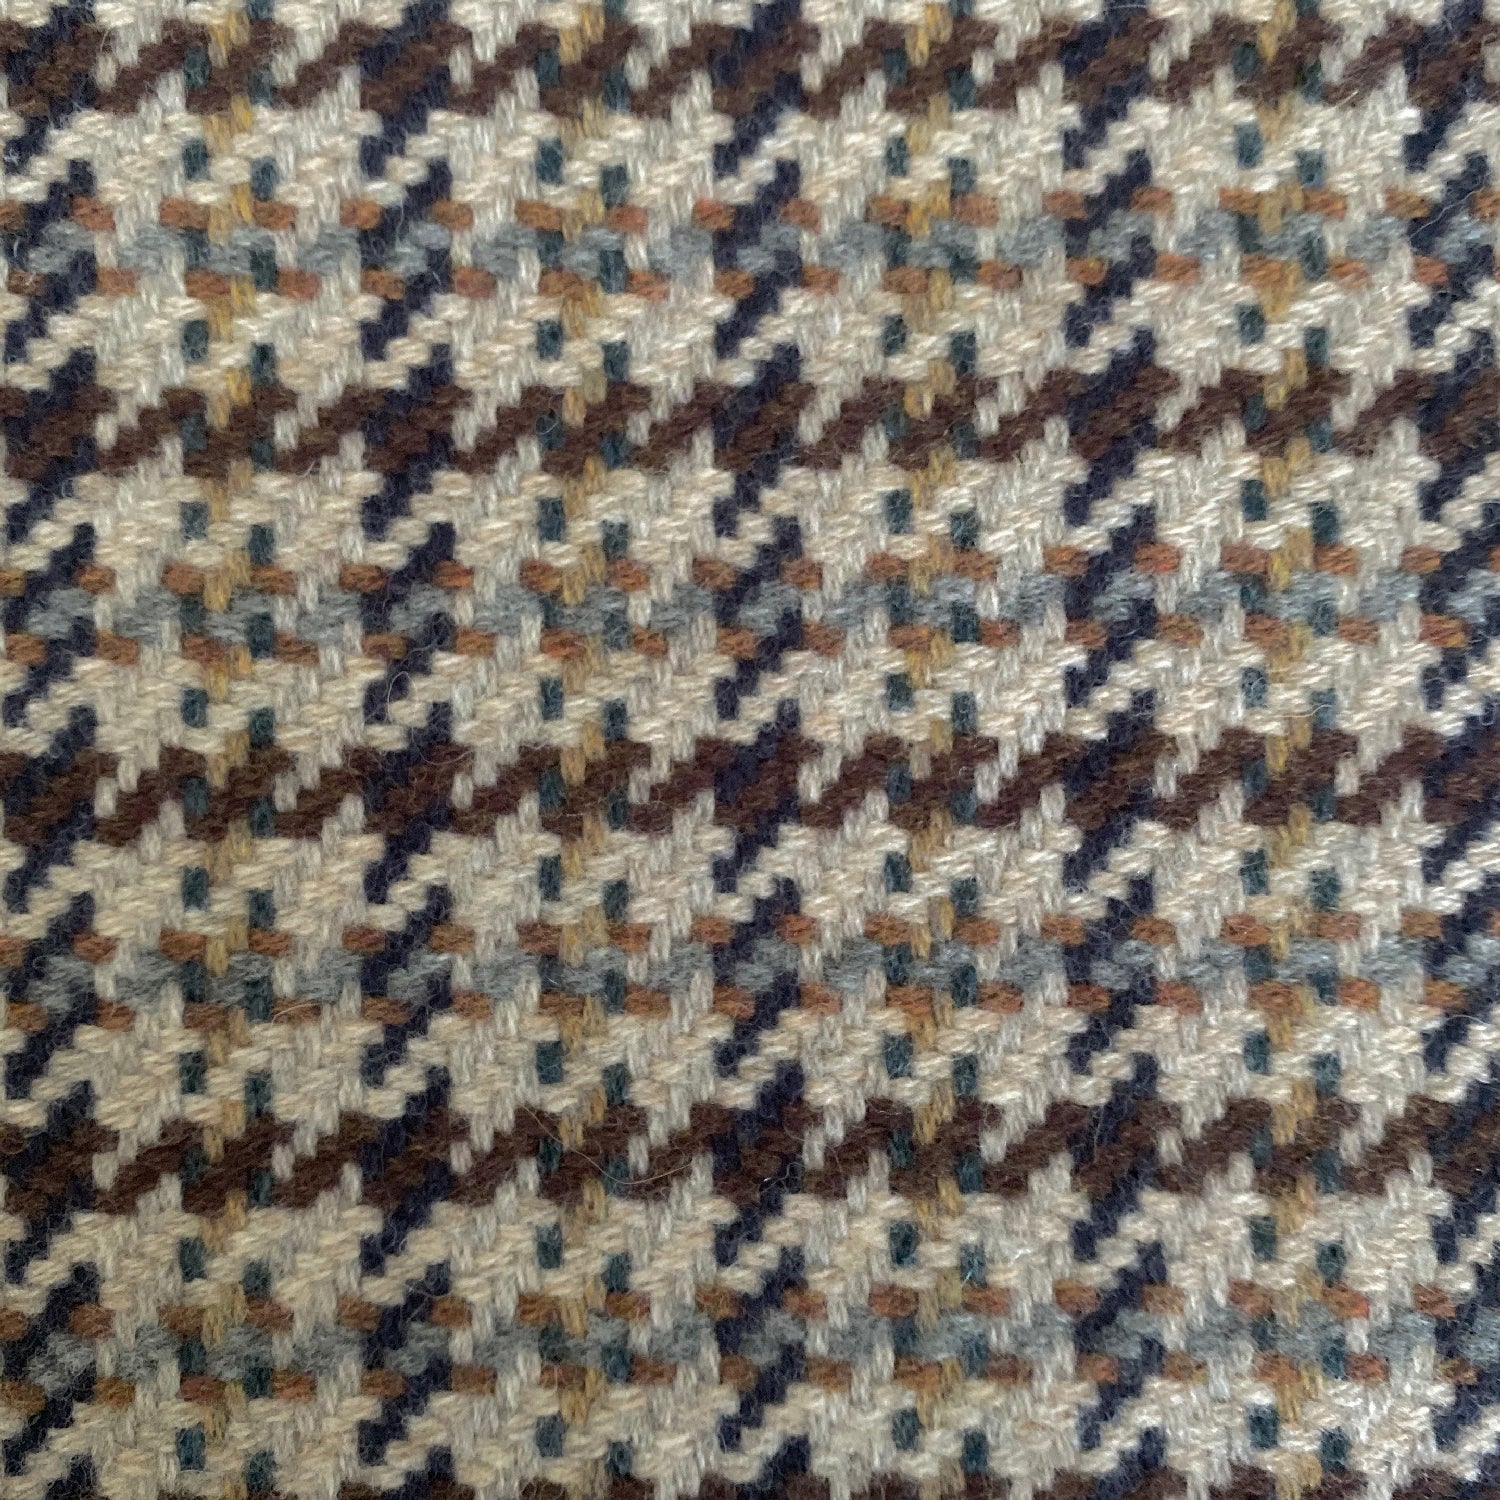 Large Soft Textured All Wool Blanket - Made Scotland